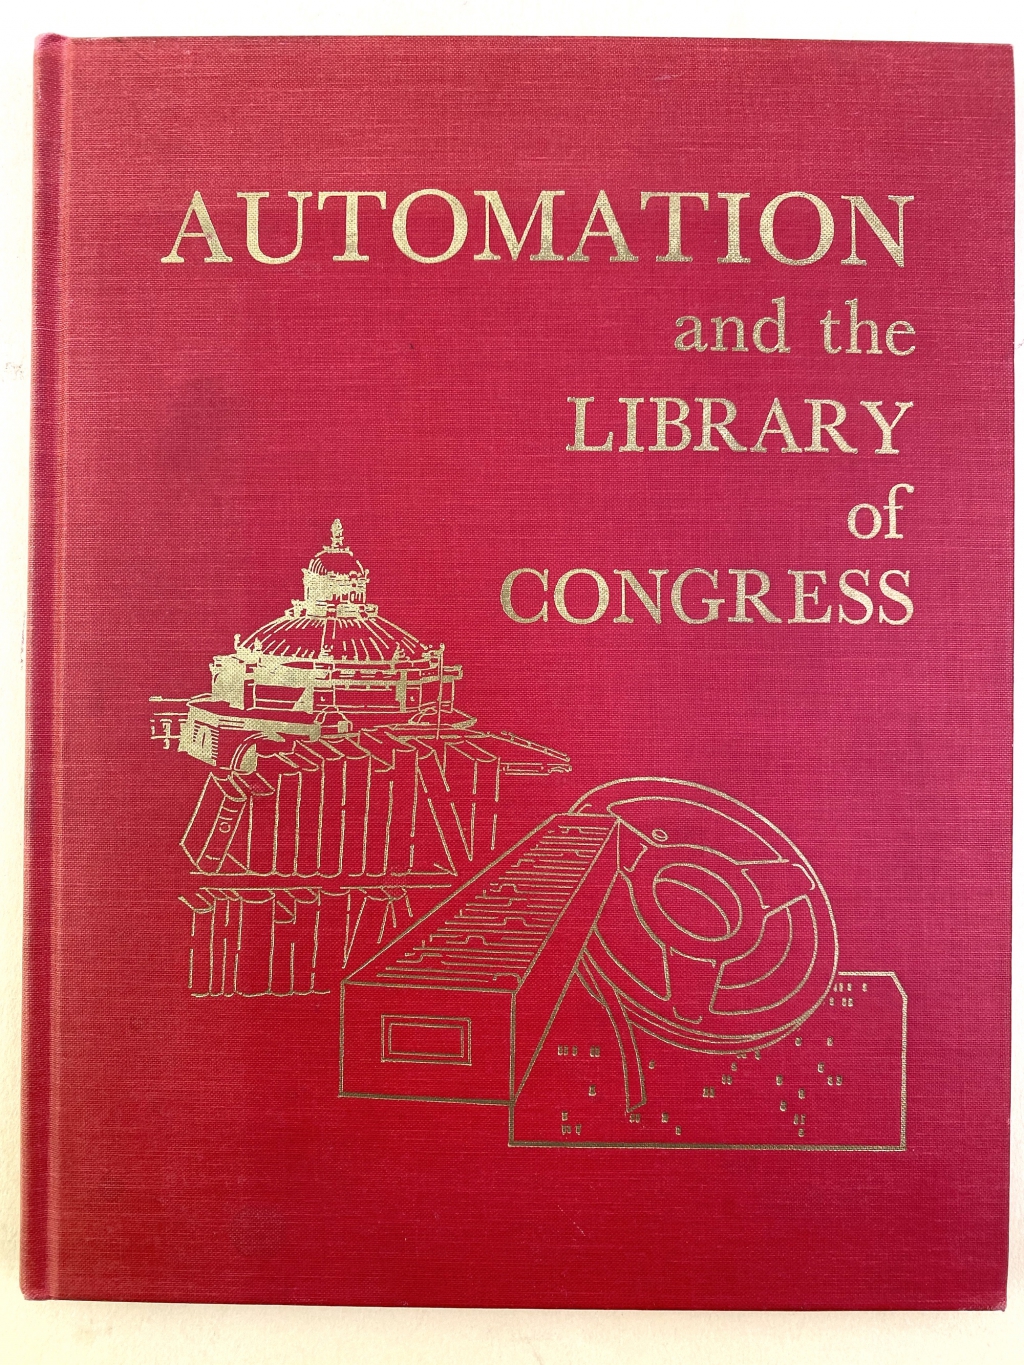 Cover of Automation and the Library of Congress